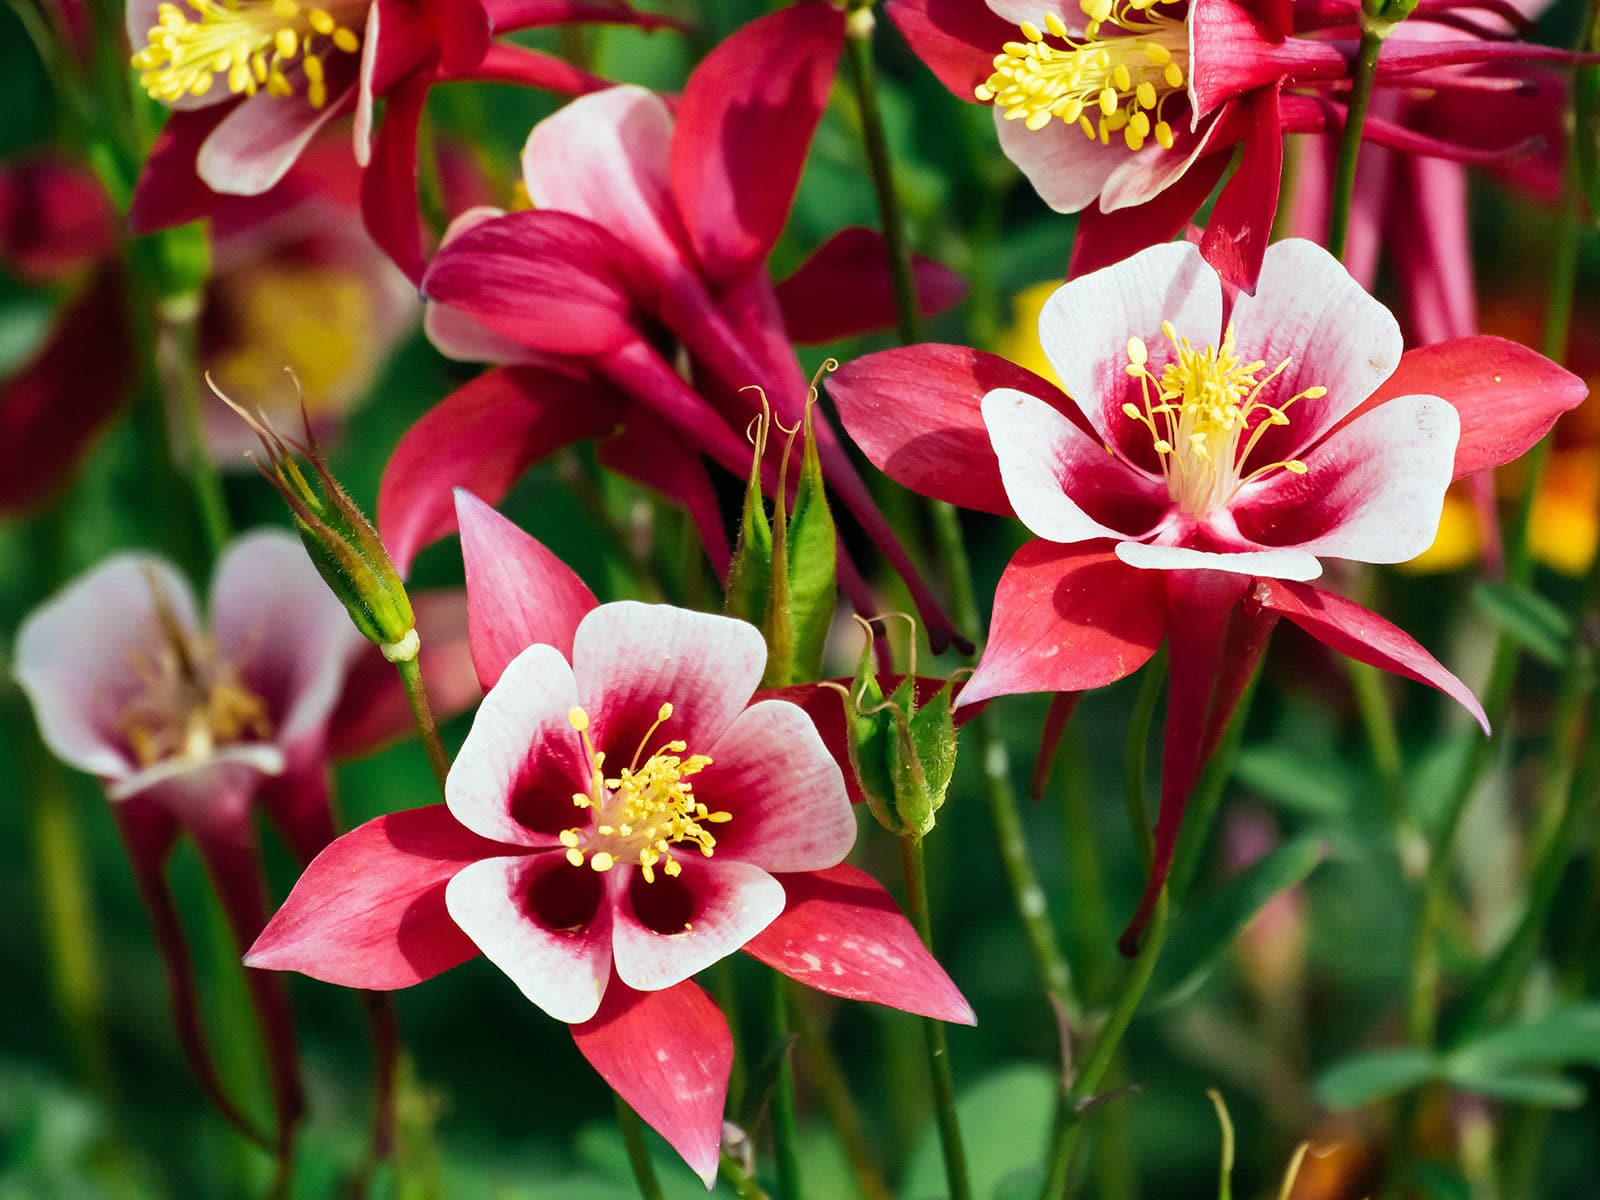 Red and white columbine flowers with yellow centers